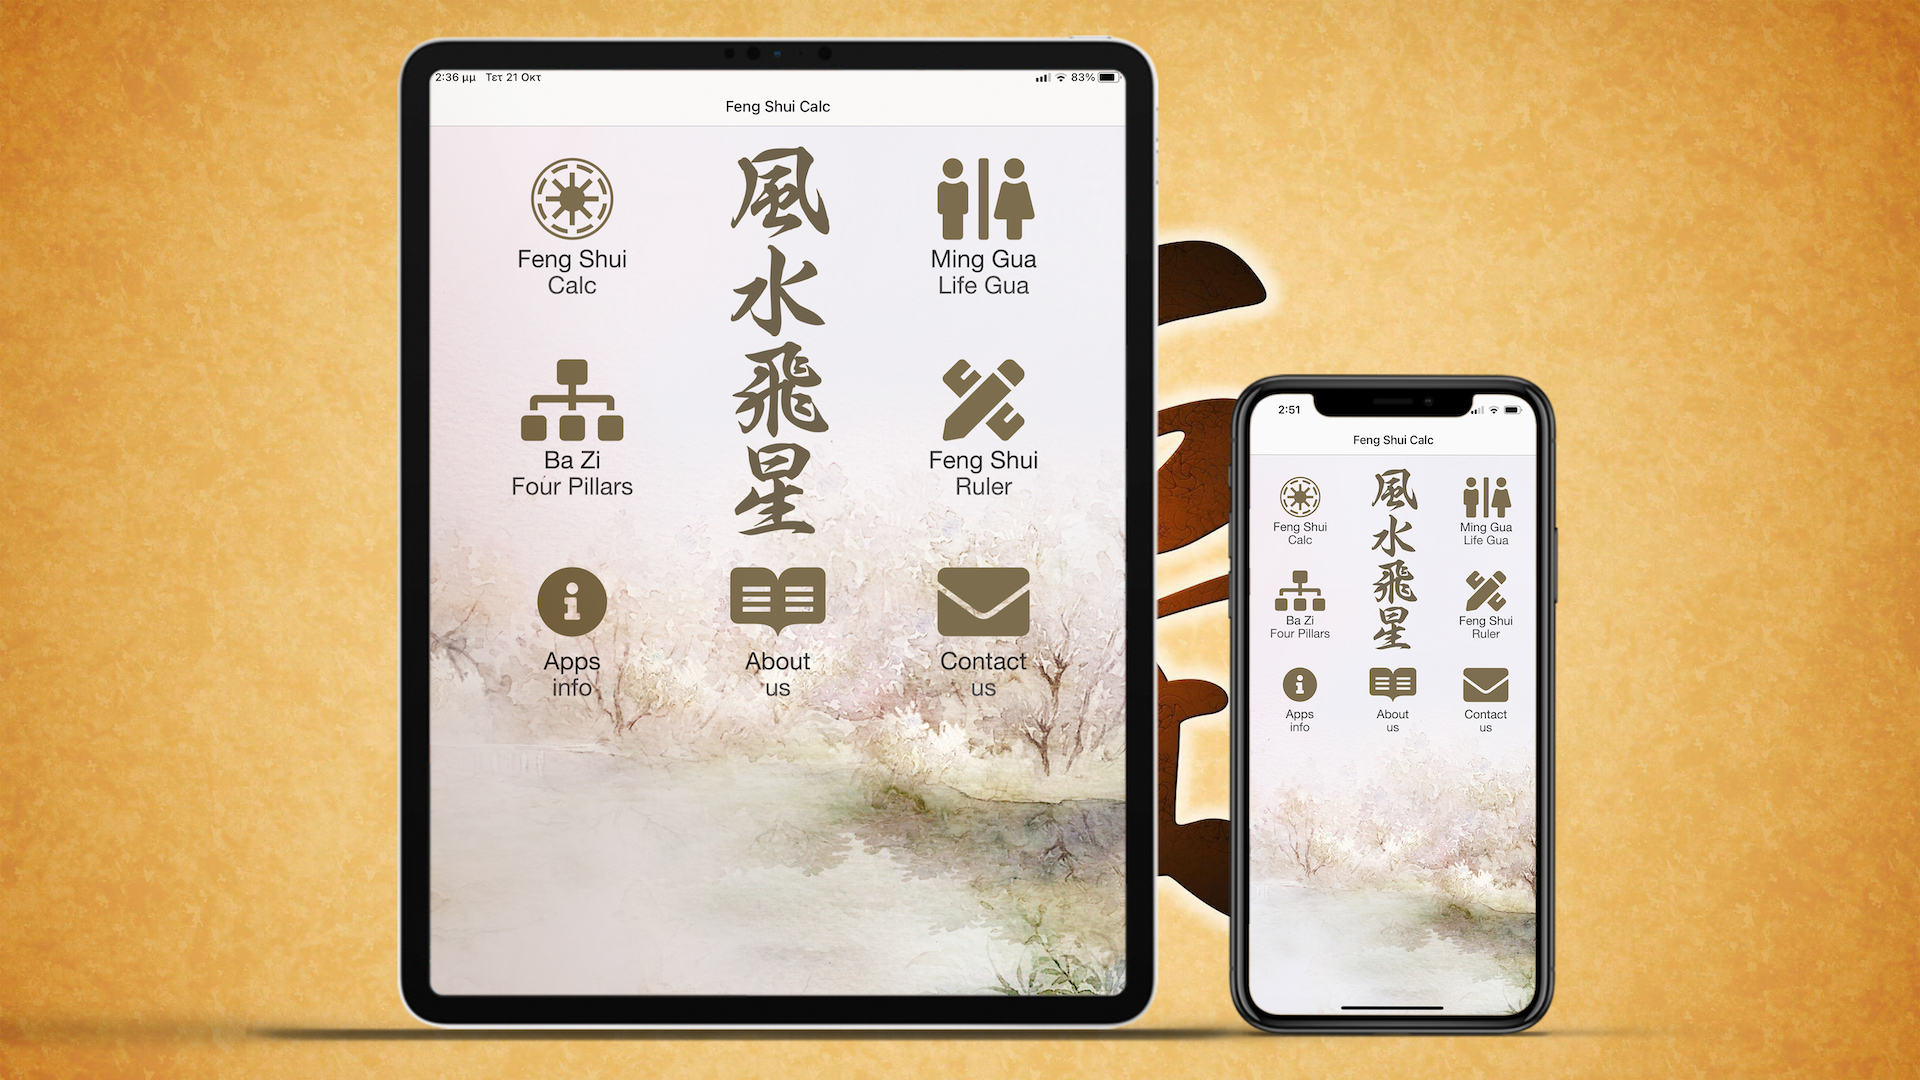 Feng Shui Calc Pro App for iPhone and iPad